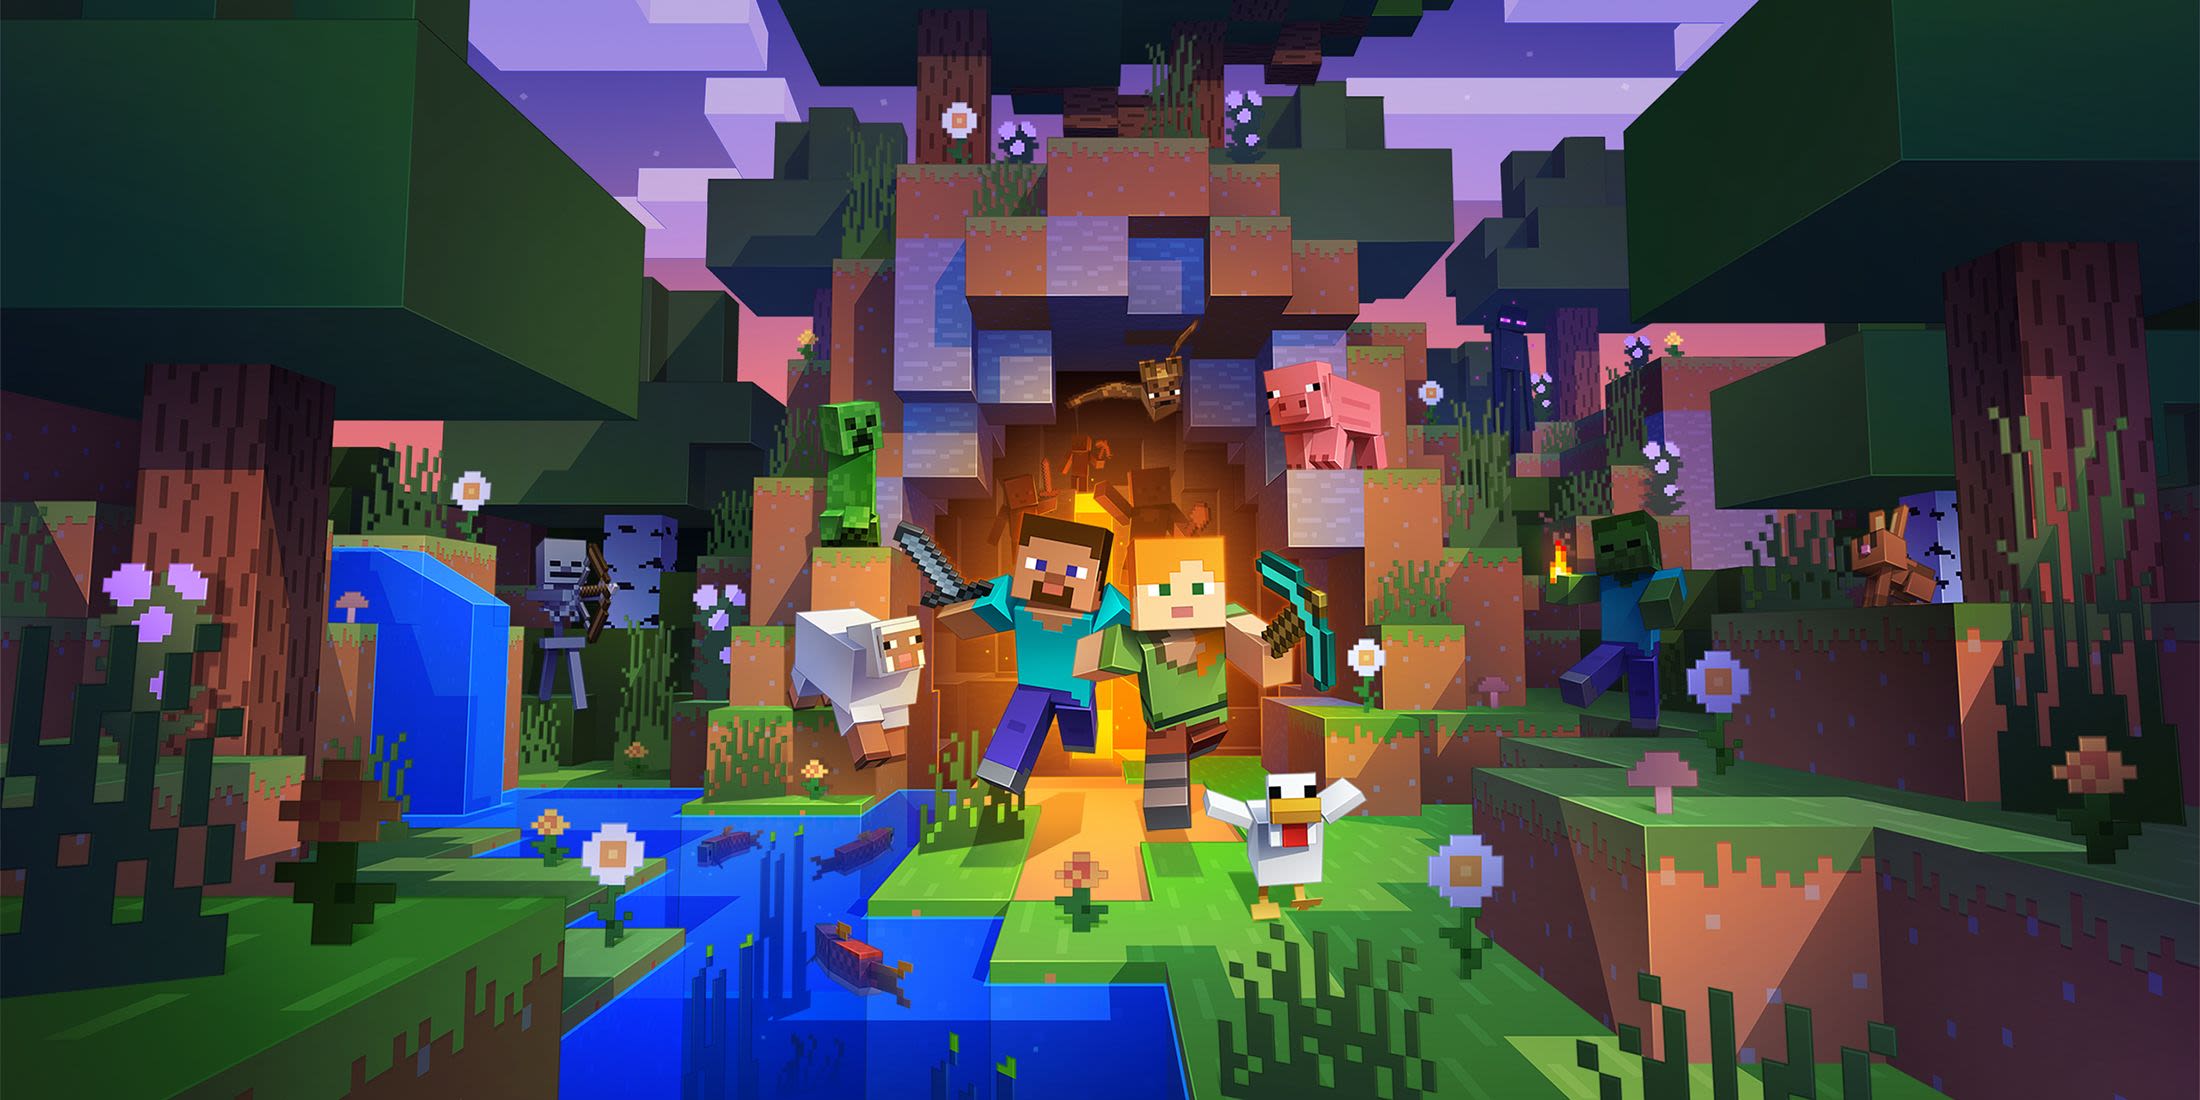 Minecraft Is Giving Away Free Items for the Game's 15th Anniversary